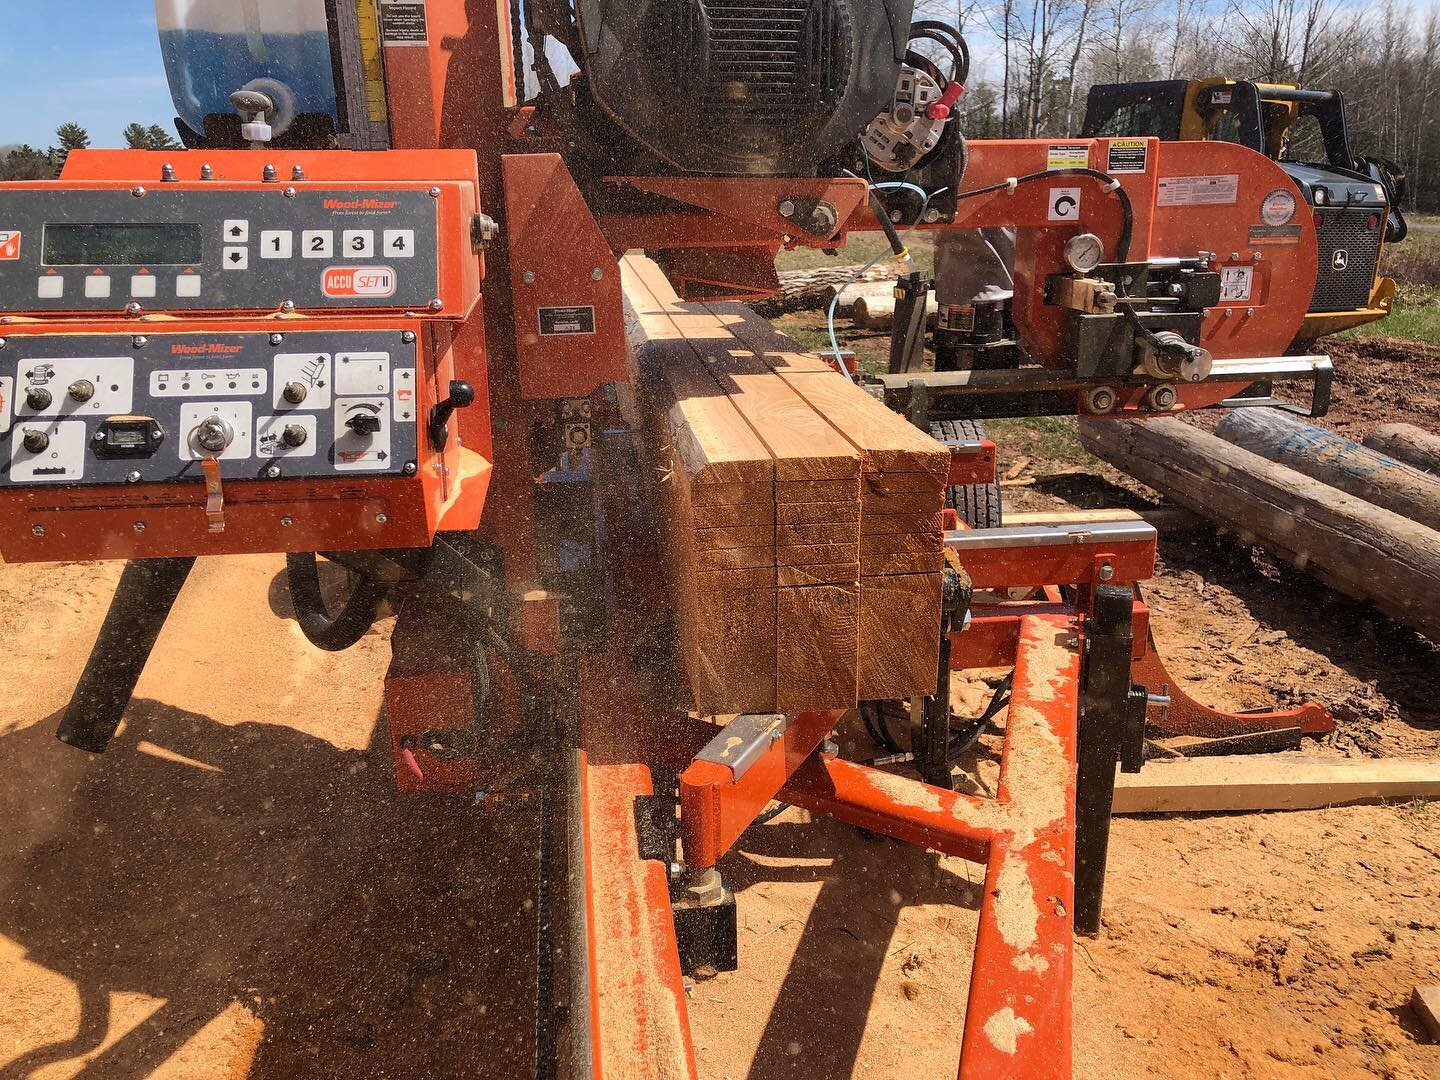 #woodmizerwednesday.  Sawing Western Red Cedar on a sunny afternoon.  Made all the more pleasant with Bob Uecker and Jeff Levering, the best broadcasters in baseball, calling a Brewers game in my Bluetooth earmuffs.  #woodmizer #sawmill #thinkerf #we